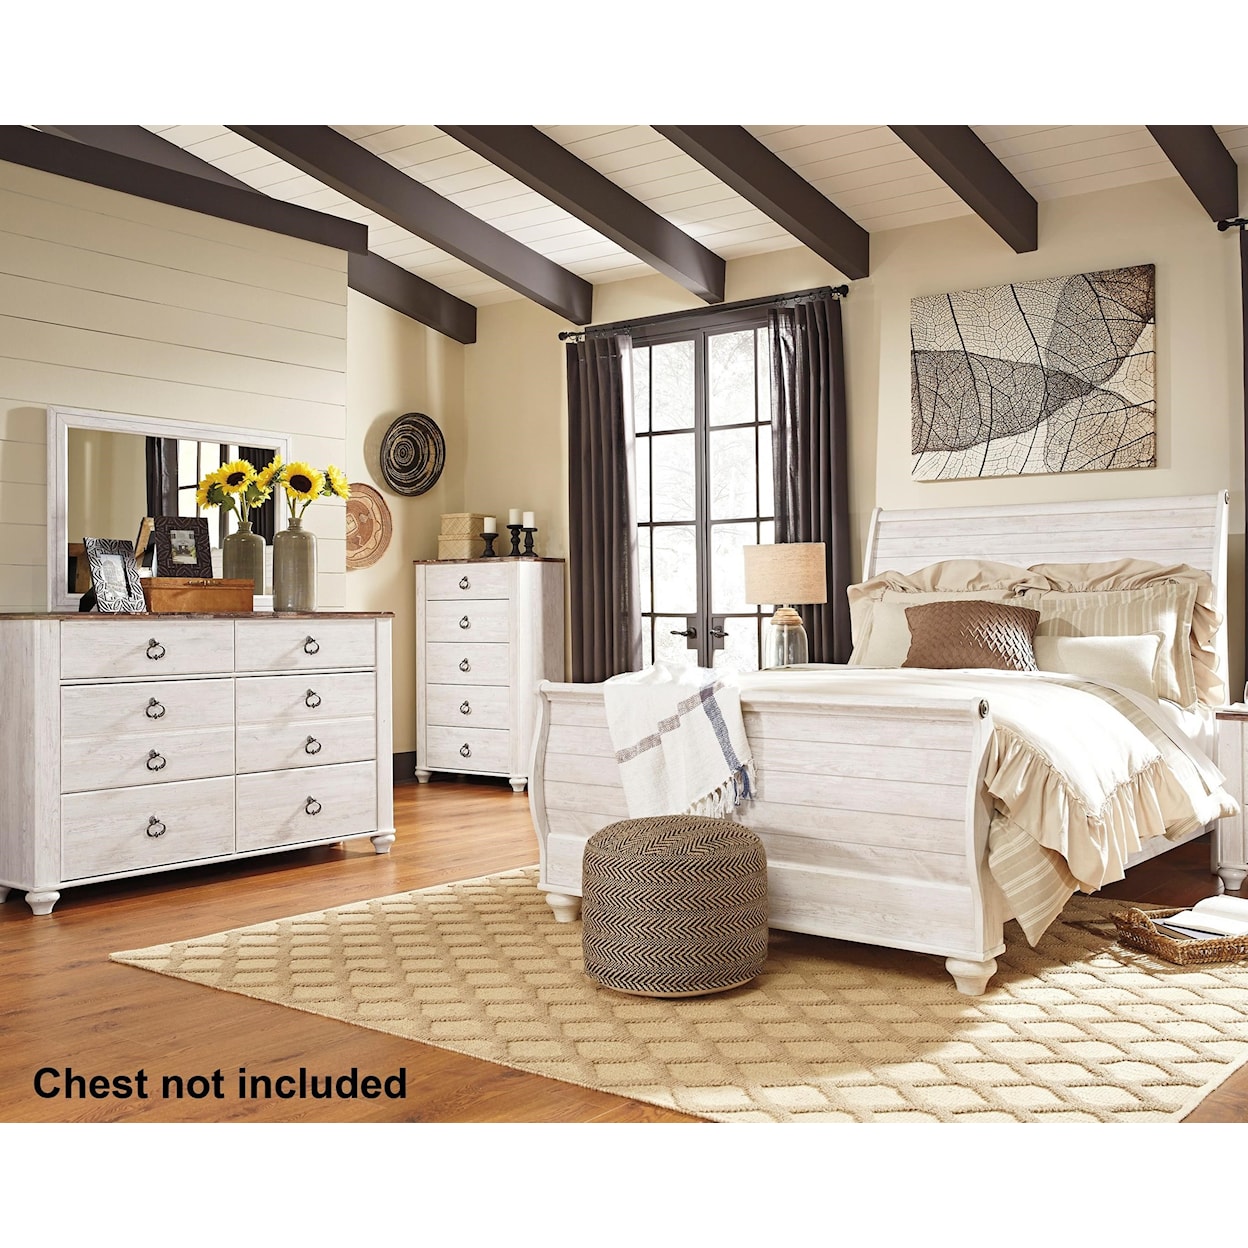 Ashley Furniture Signature Design Willowton Queen Bedroom Group